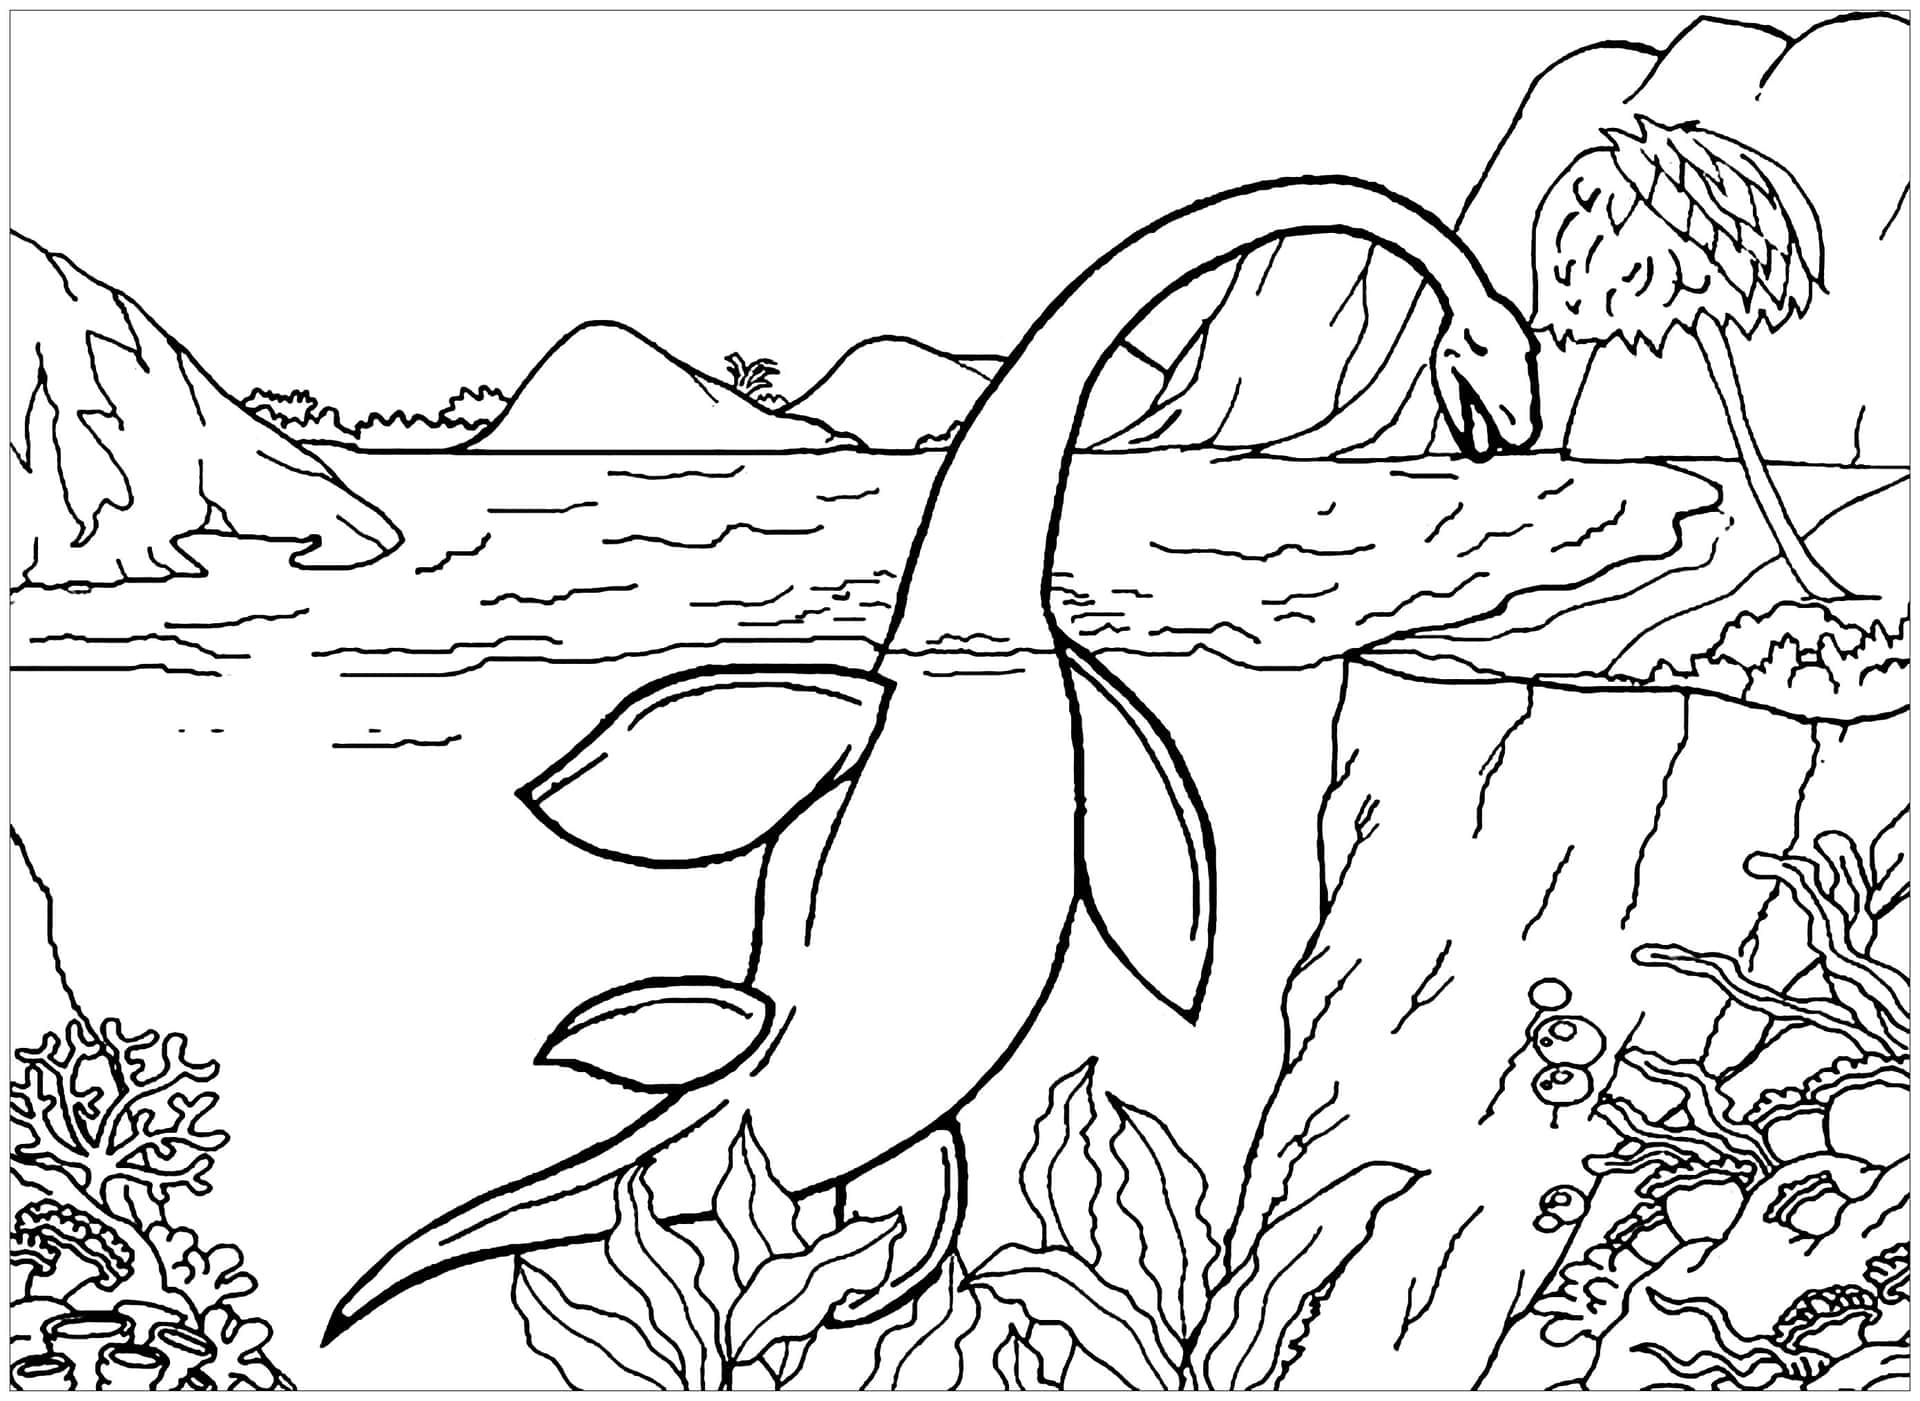 Dinosaur Coloring Pages - Photo 20